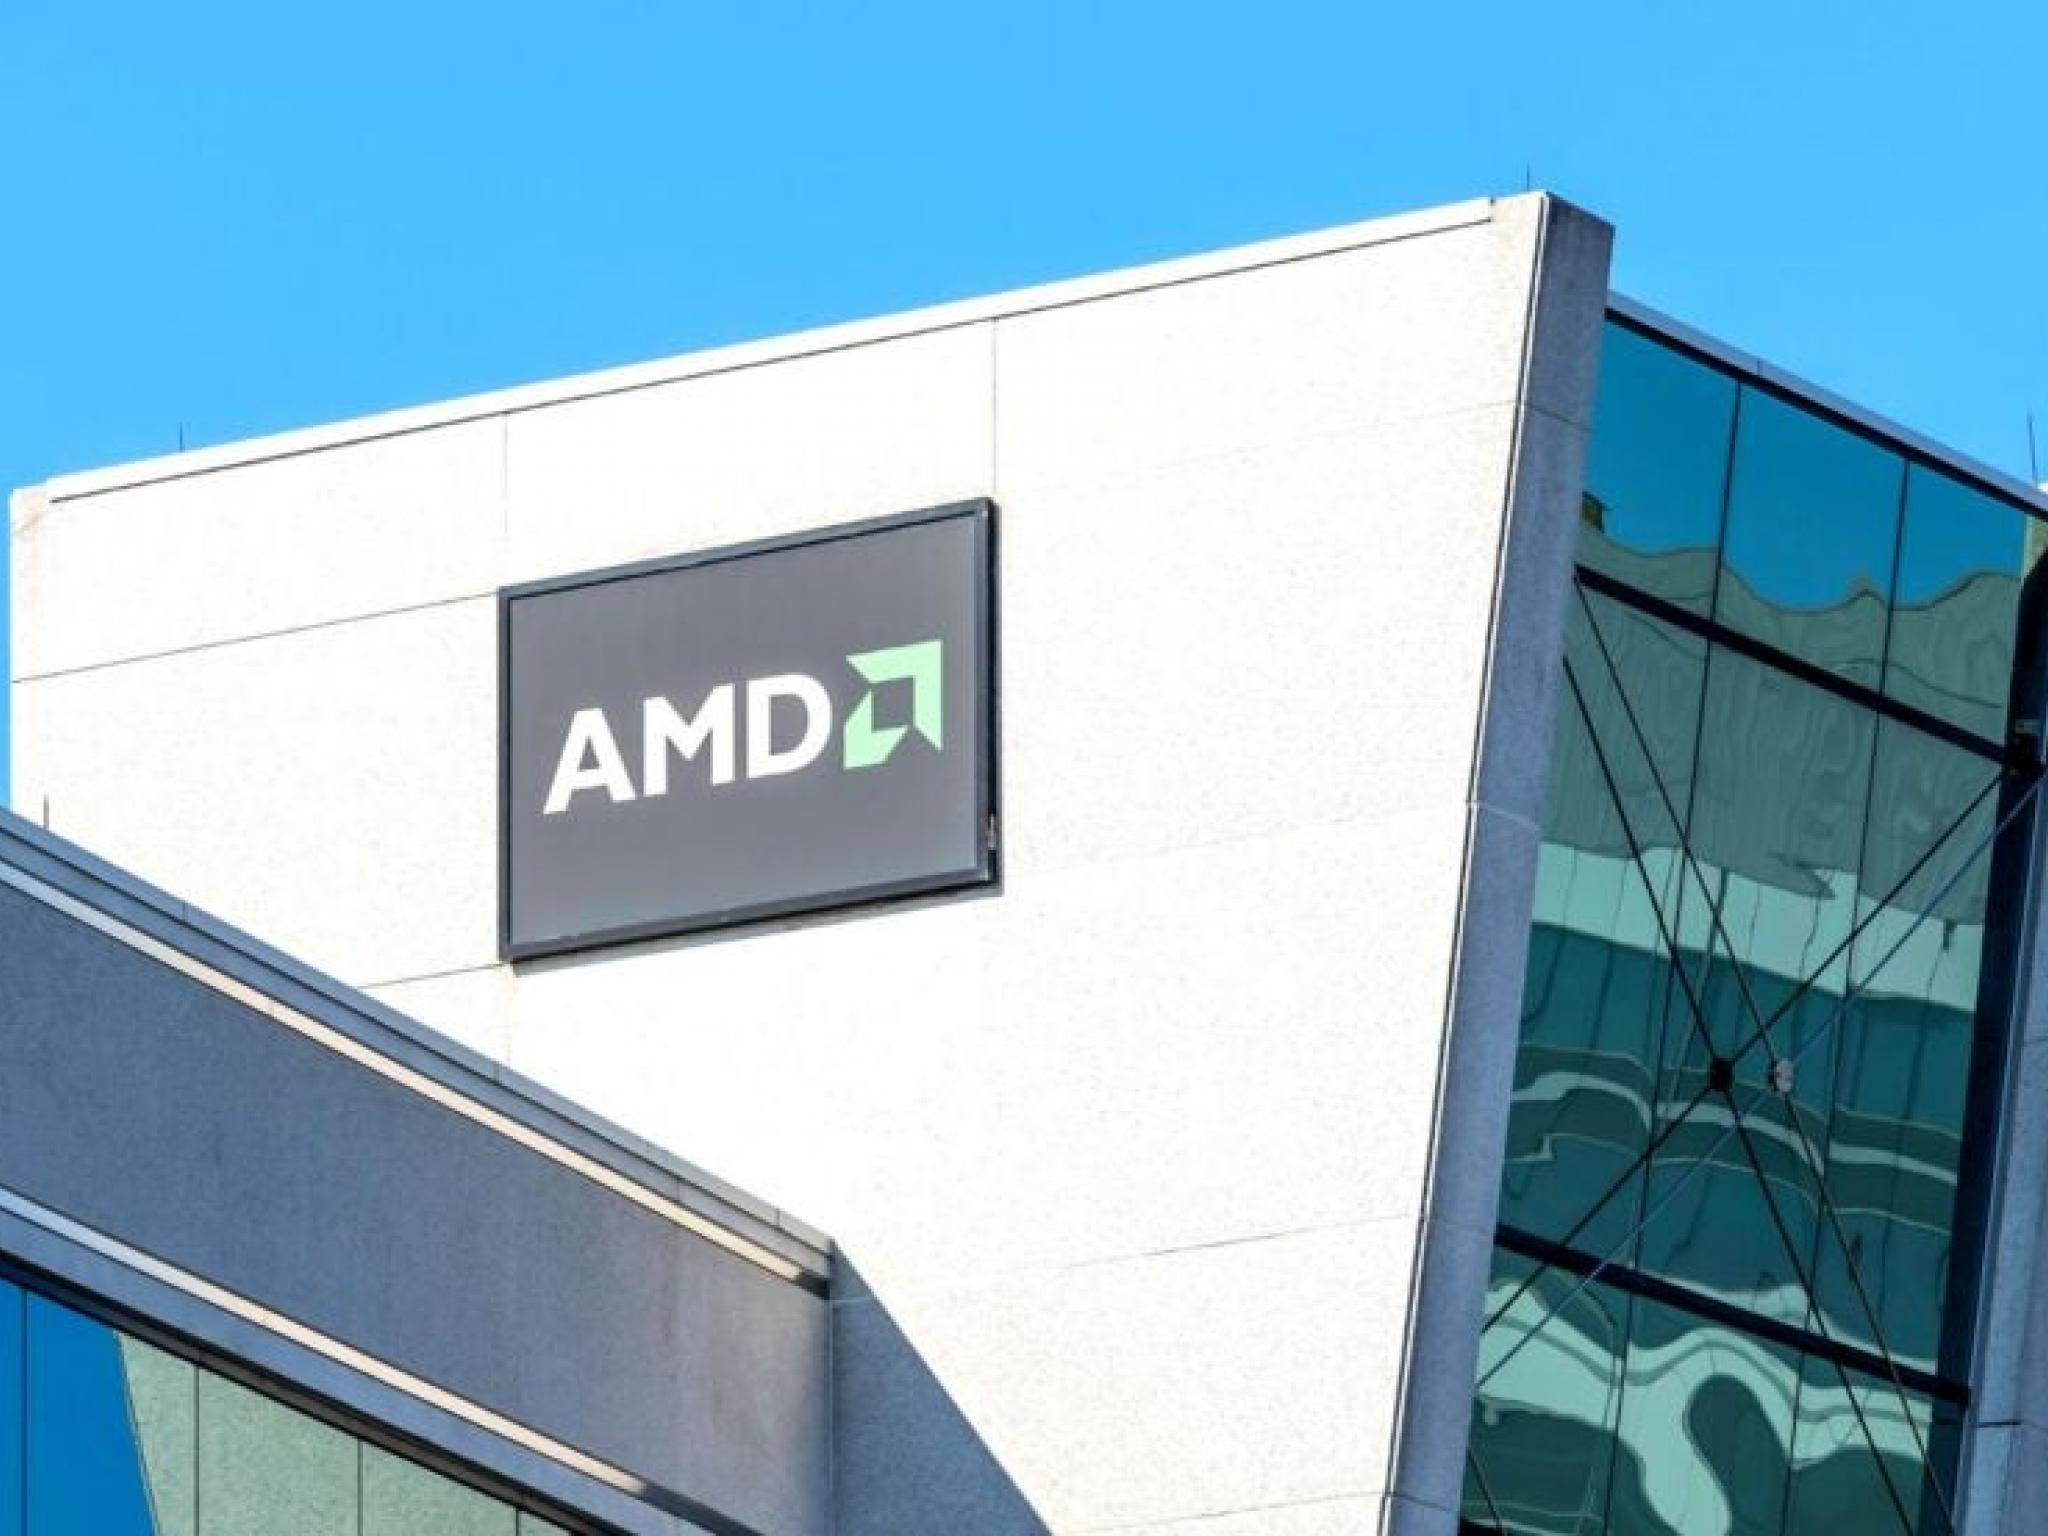  amd-partners-with-microsoft-meta-and-google-on-new-ai-accelerator-link-standard-to-challenge-nvidias-dominance 